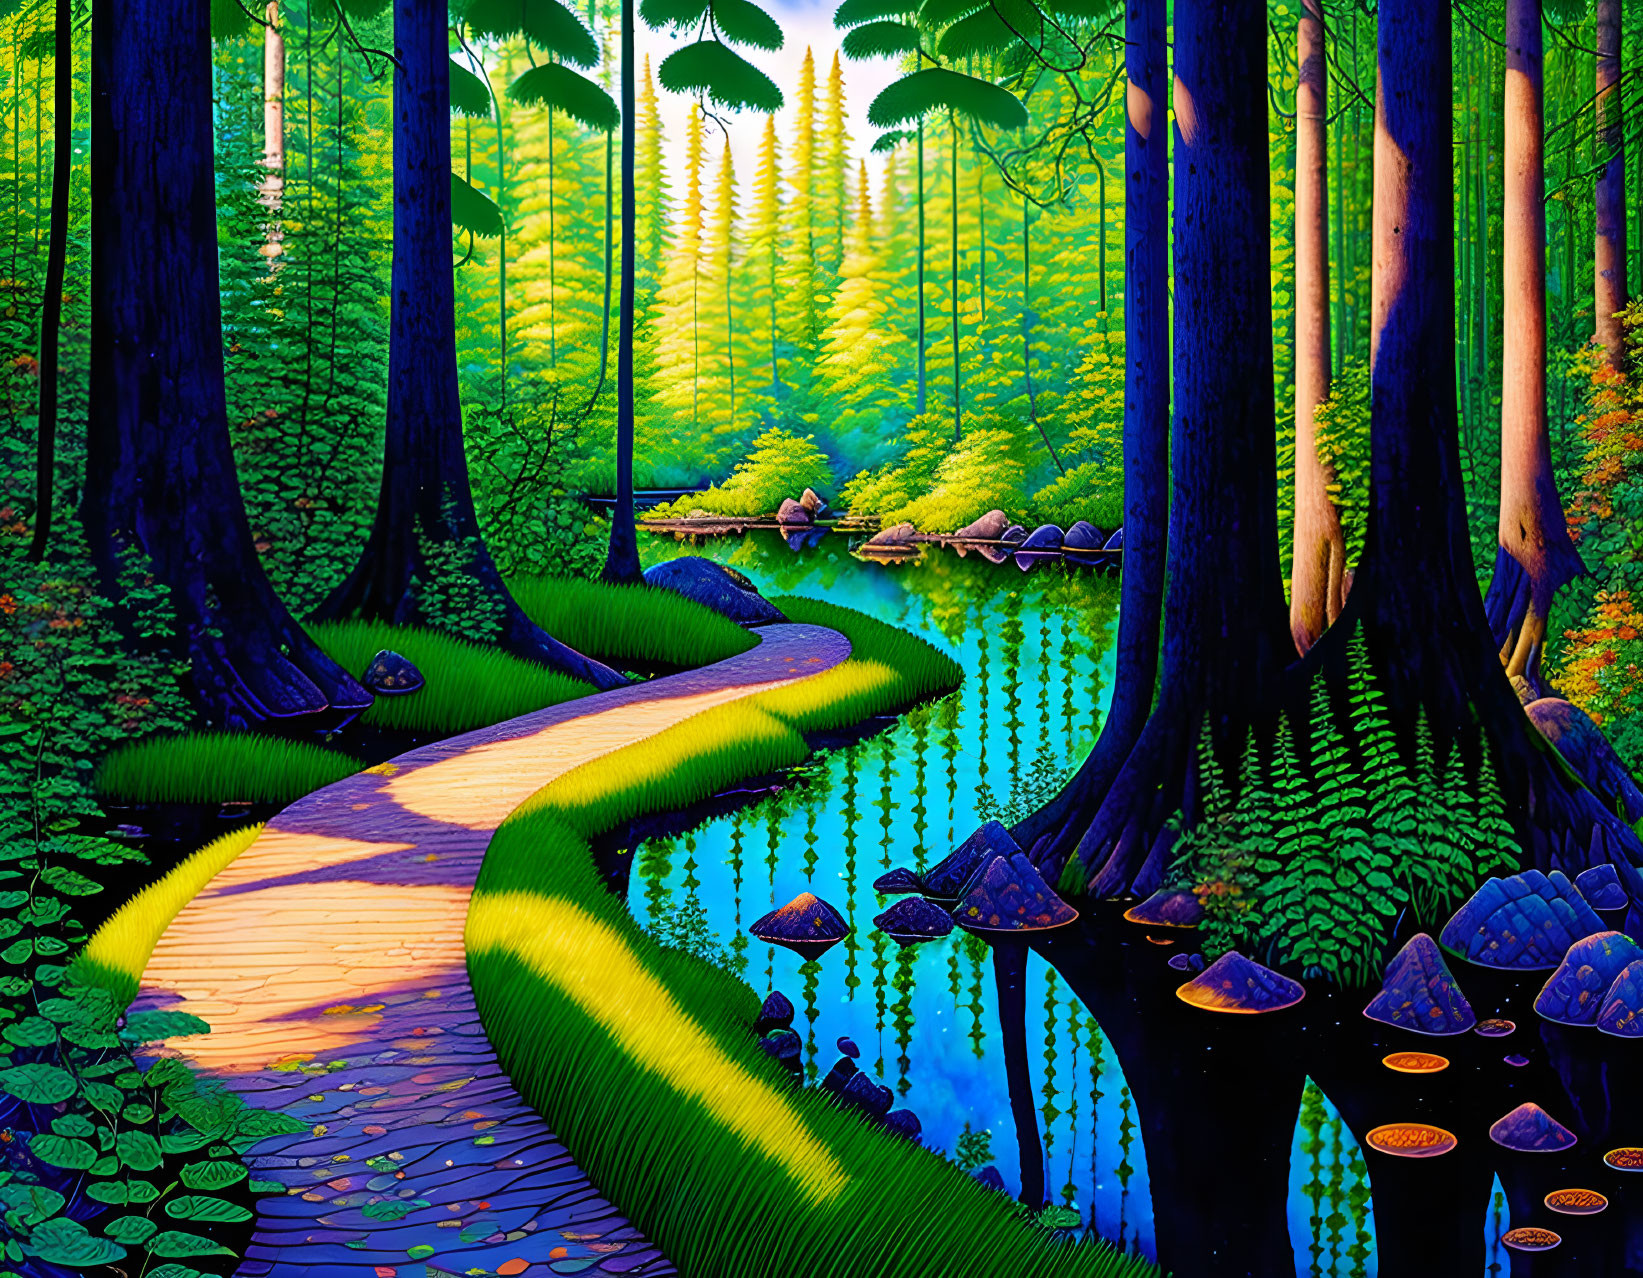 Forest with ferns